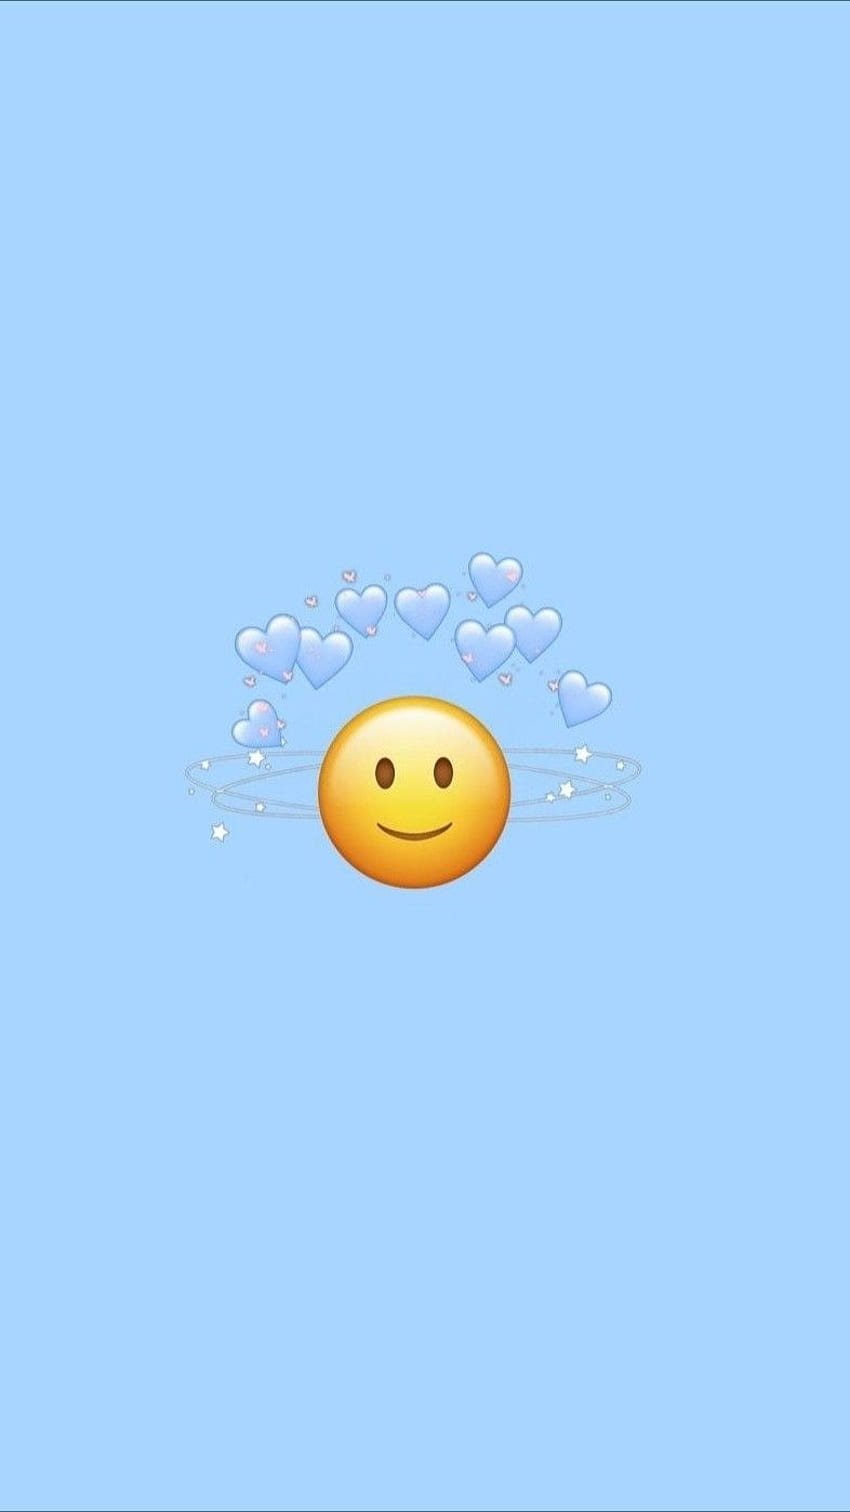 eMoji Wallpapers Full HD 4K APK pour Android Télécharger